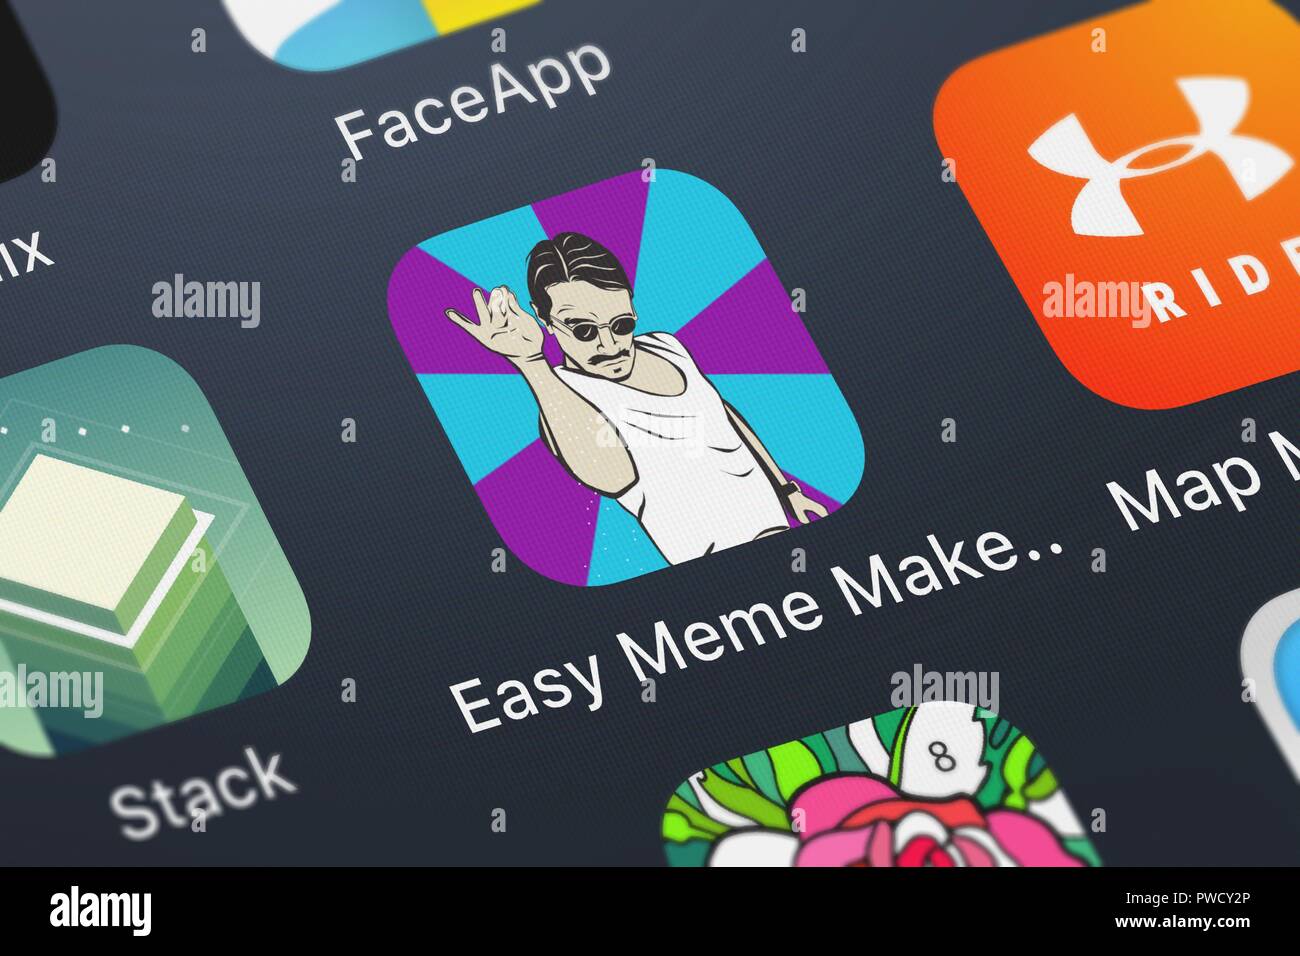 How To Make A Meme (What Apps To Use 2018)